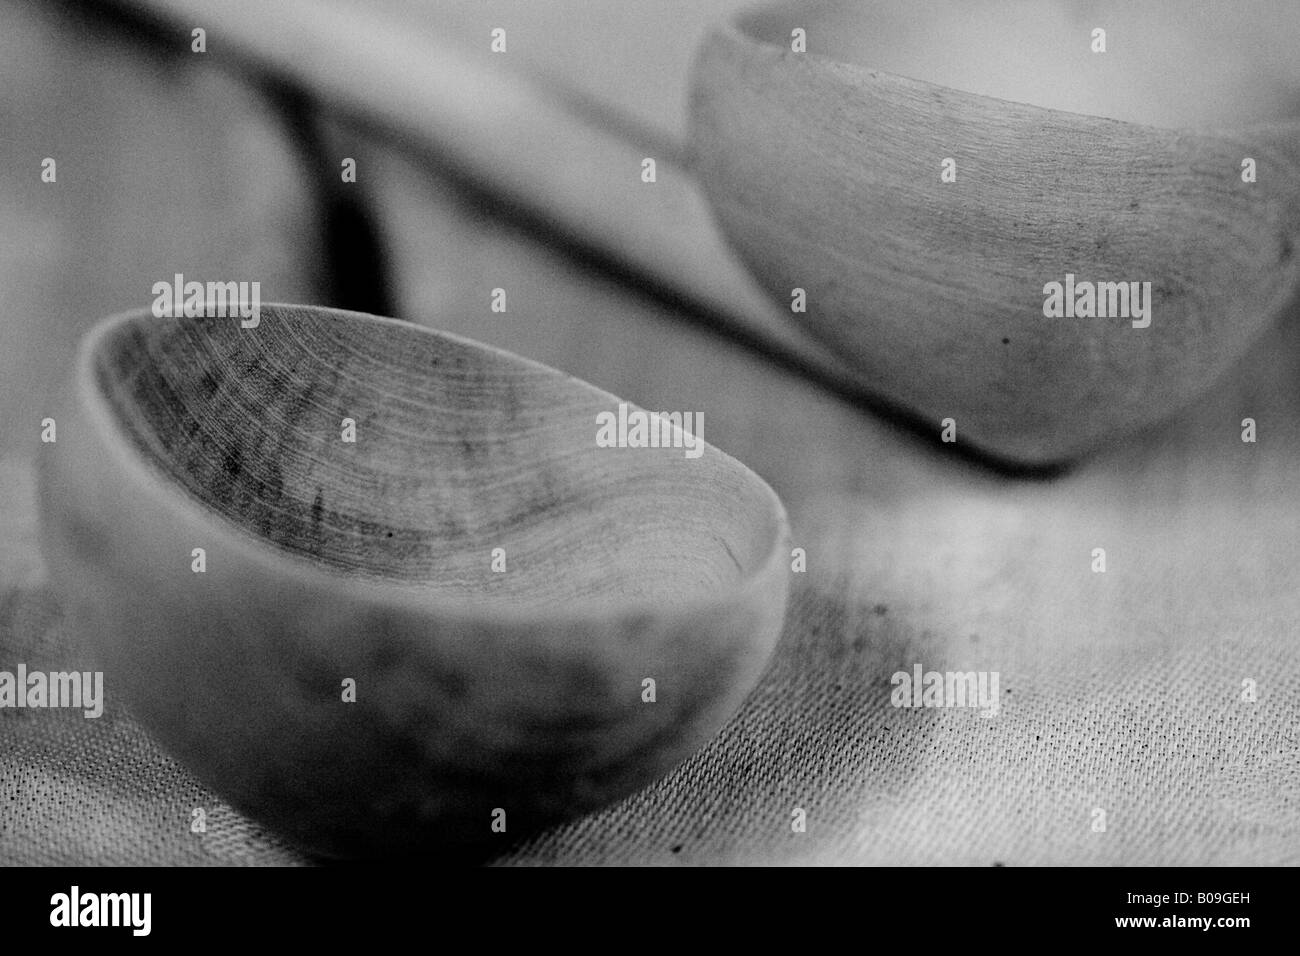 Black and while wooden spoons Stock Photo